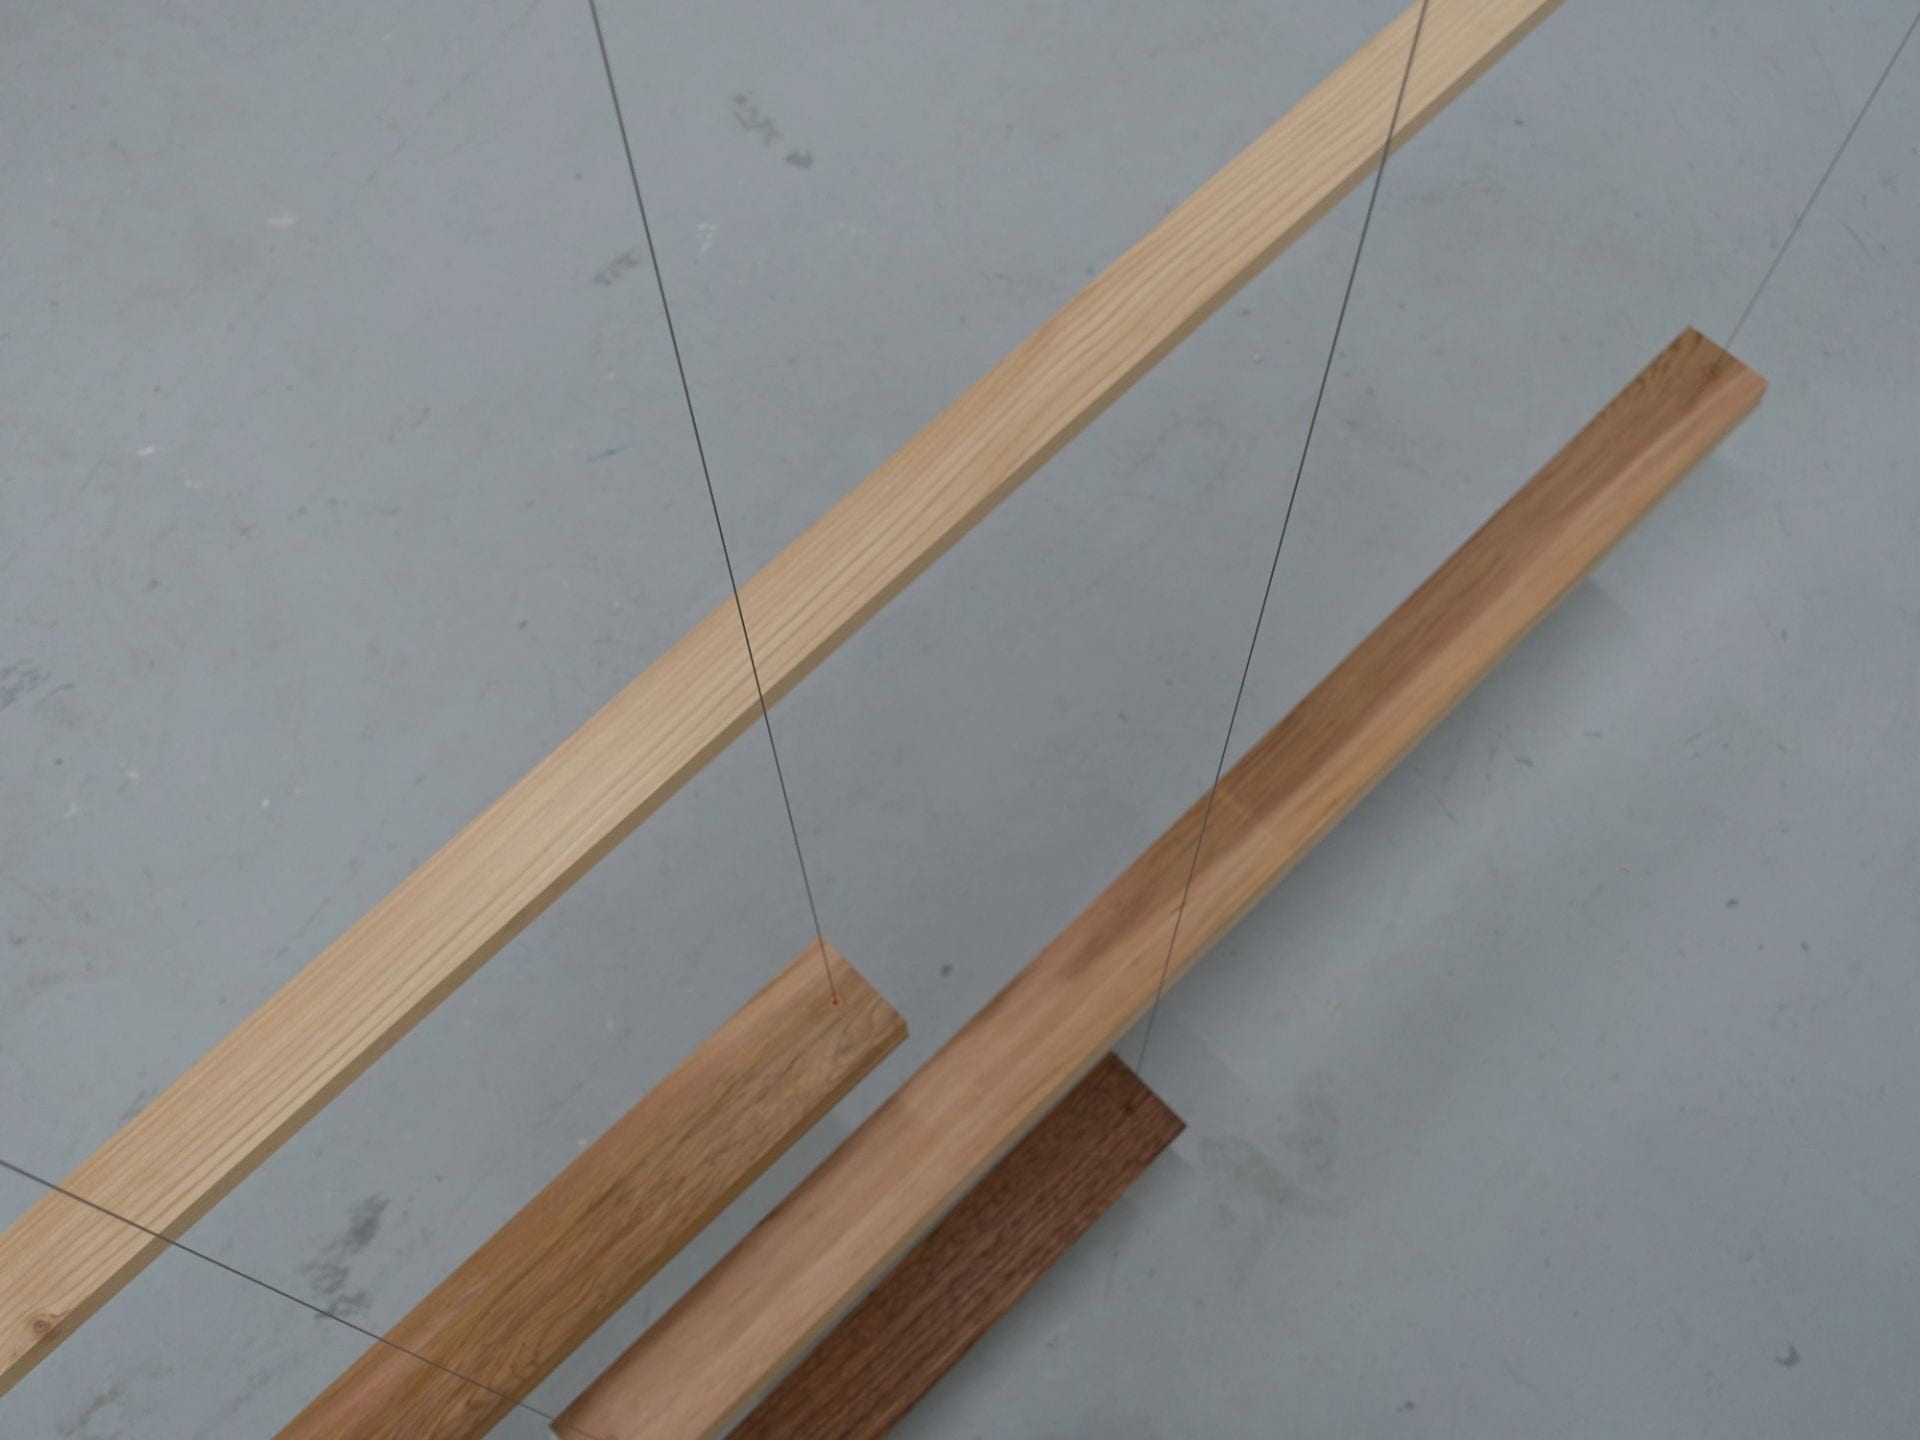 Four pieces of wood suspended by steel wire.